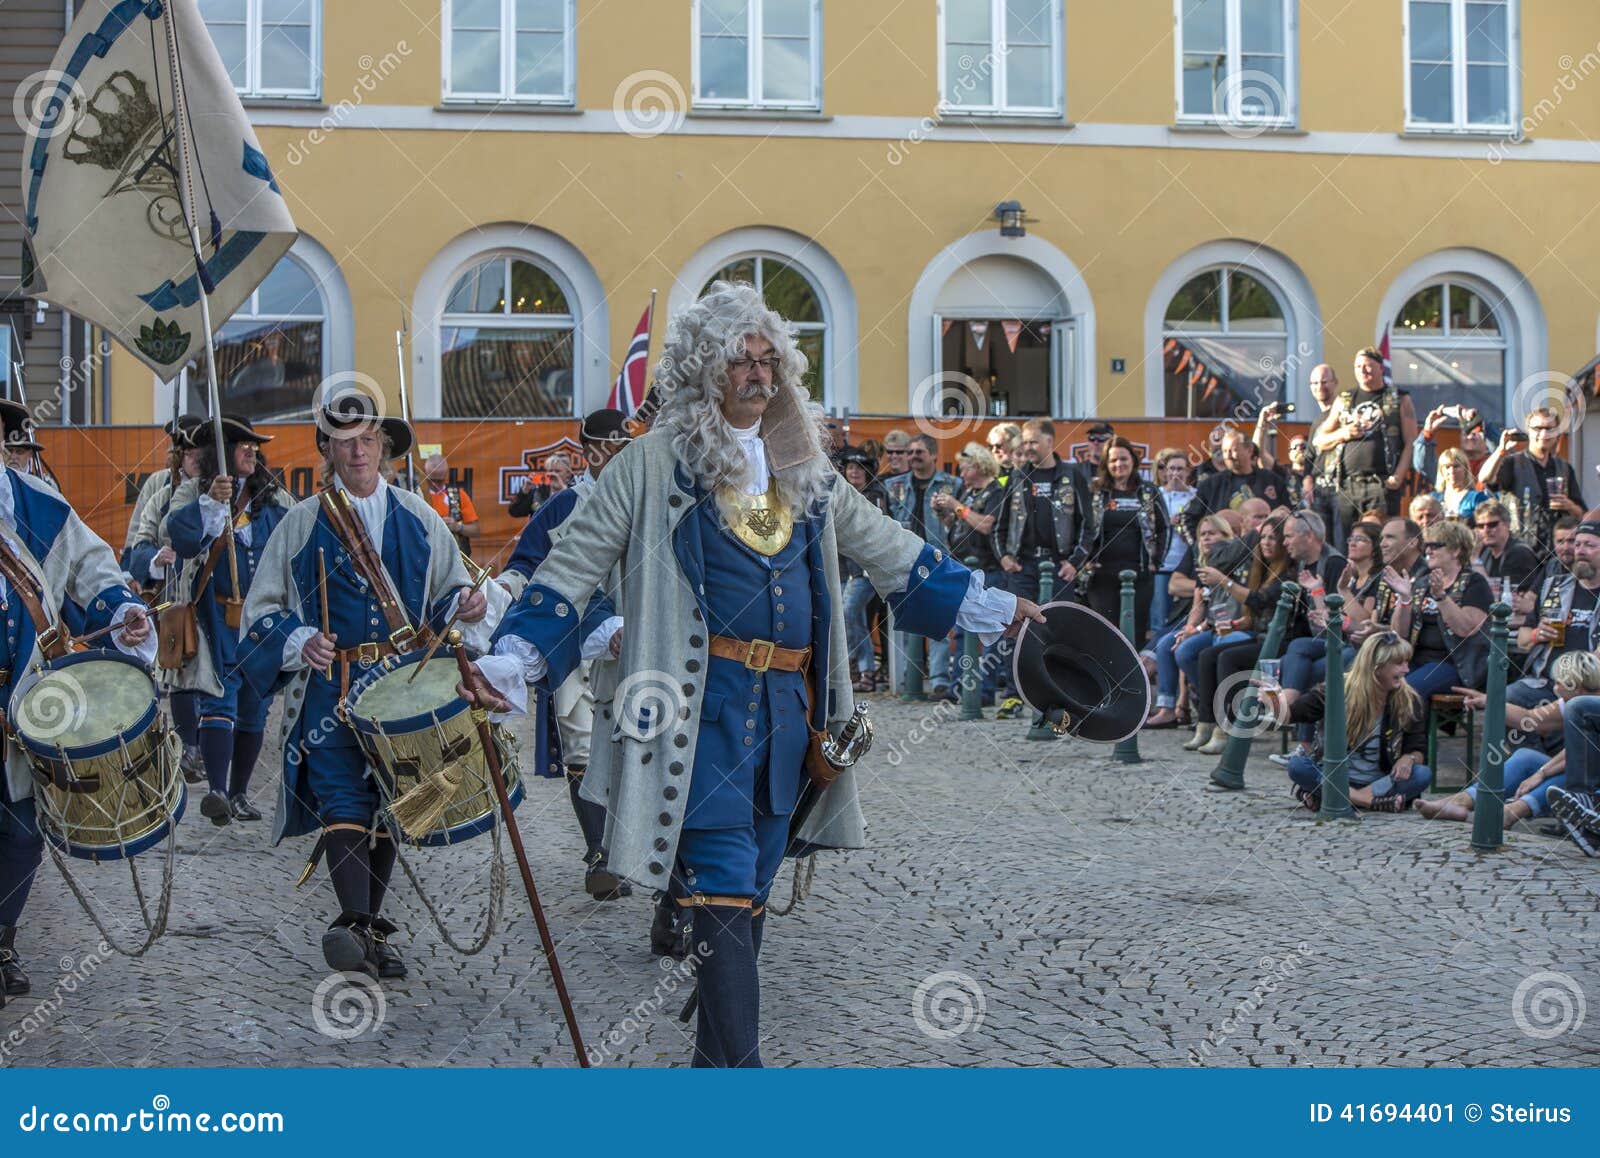 Dance, Party and Appearance at Halden Squares Editorial Photo - Image ...